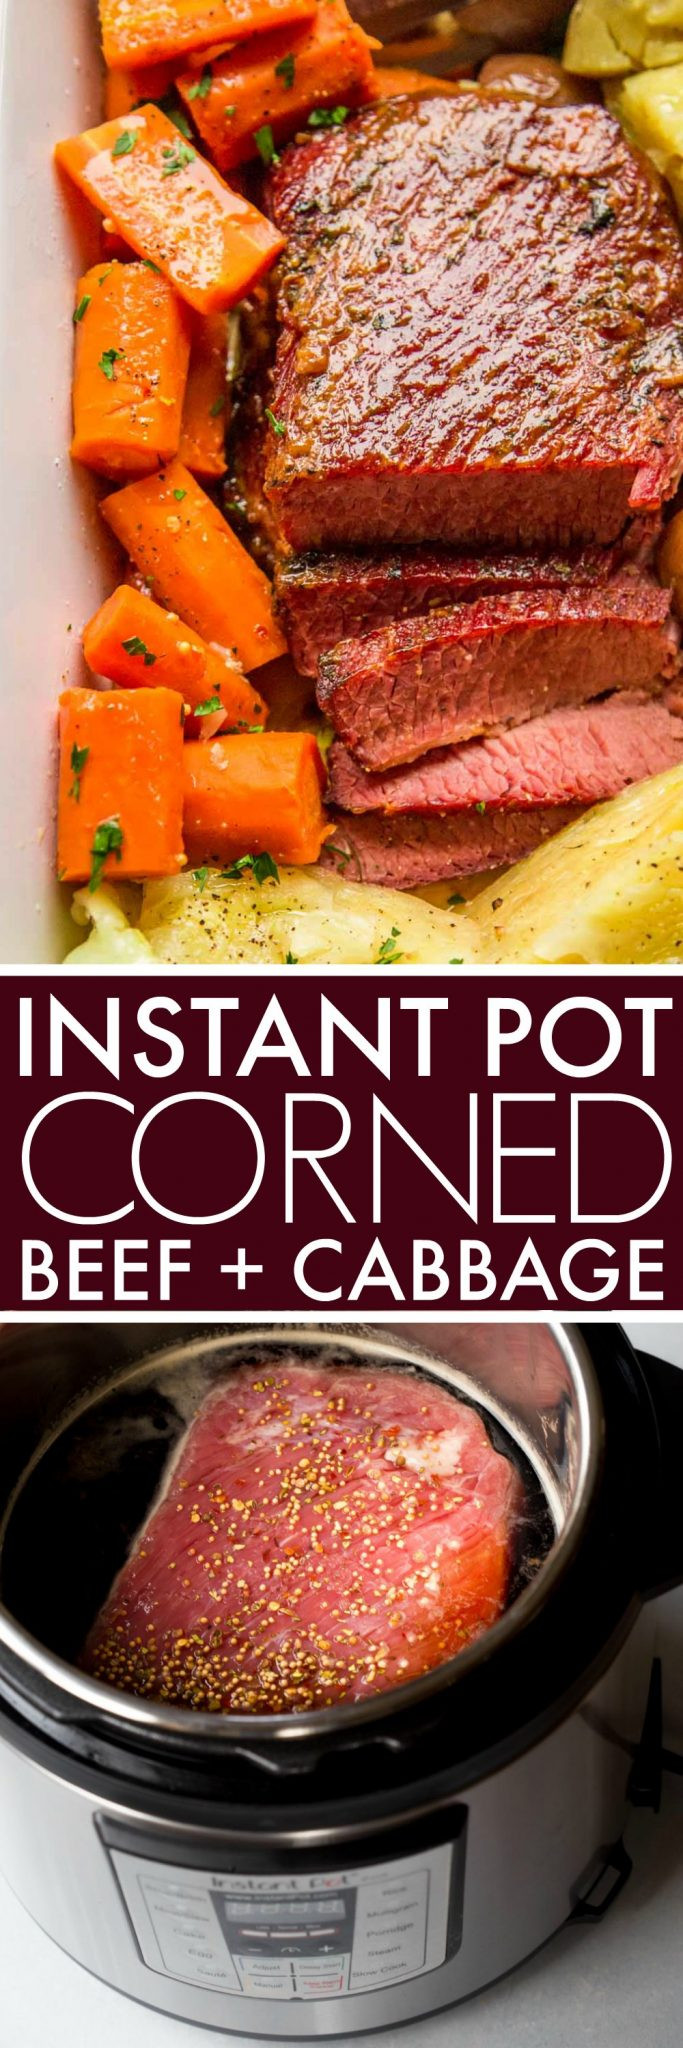 Corned Beef And Cabbage In Instant Pot
 Instant Pot Glazed Corned Beef & Cabbage